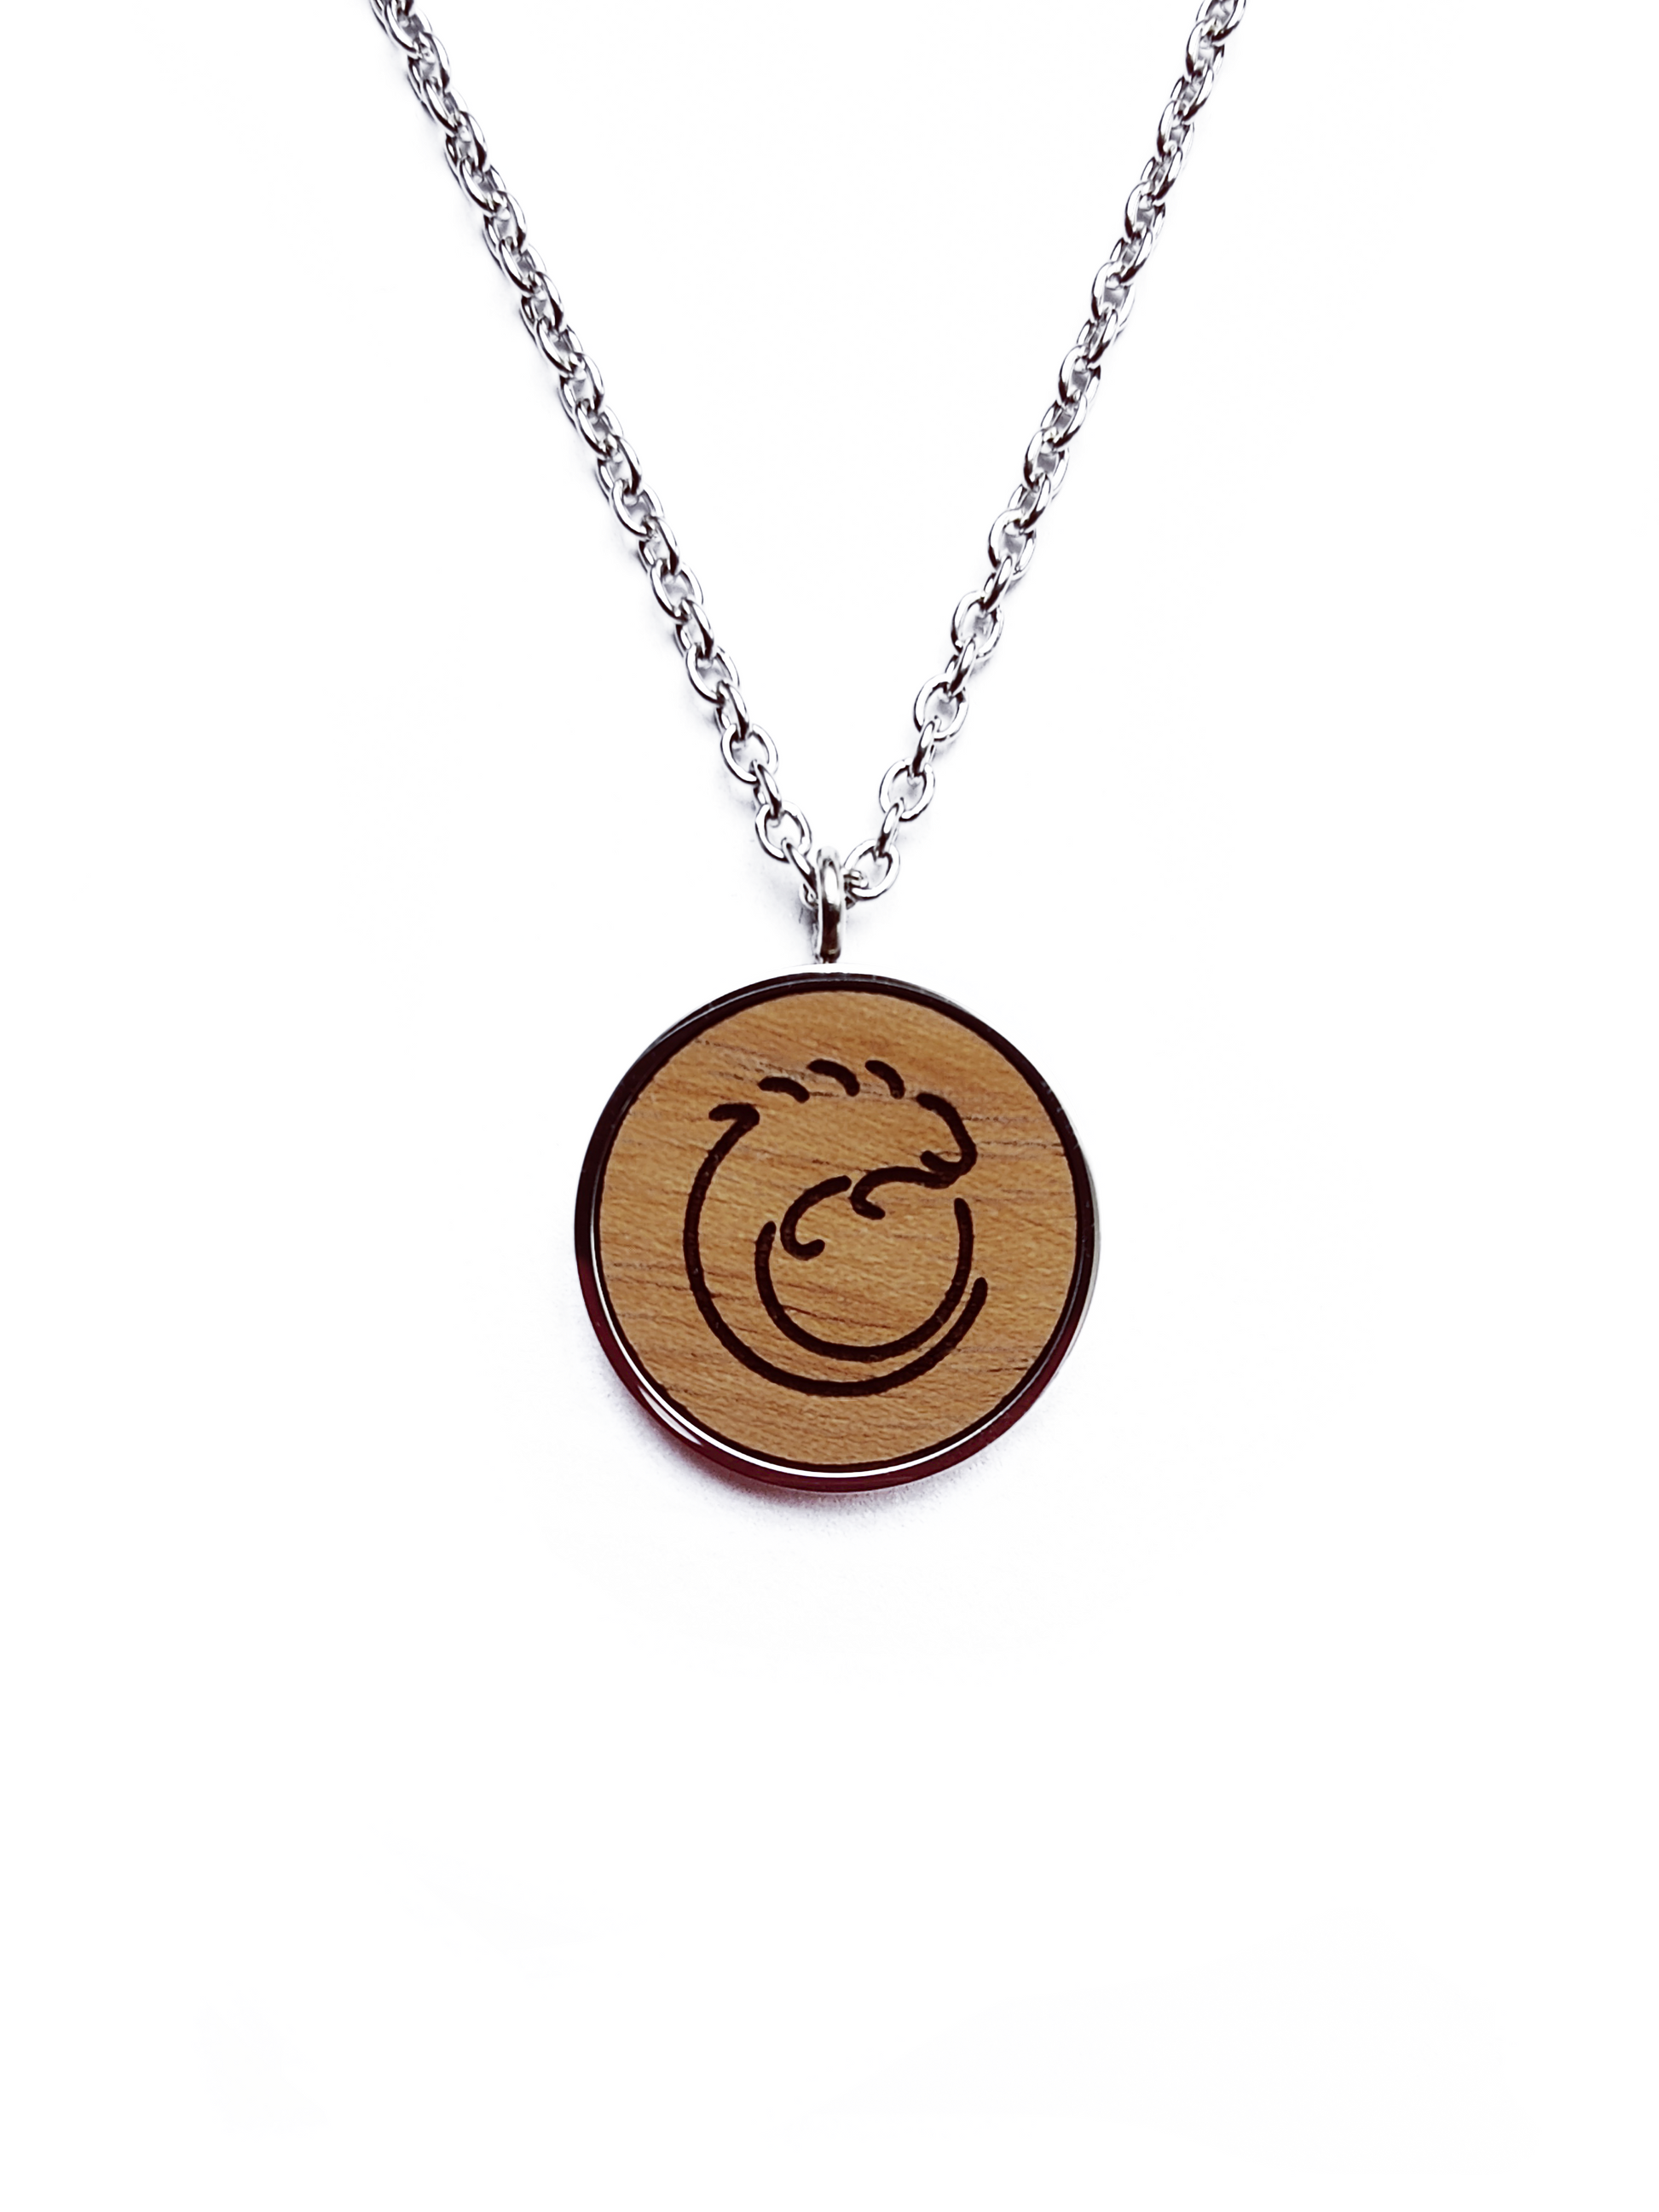 Nut wood iguana pendant necklace with stainless steel chain. All our eco-friendly necklaces are delivered in FSC certified jewelry boxes with sustainable foam.